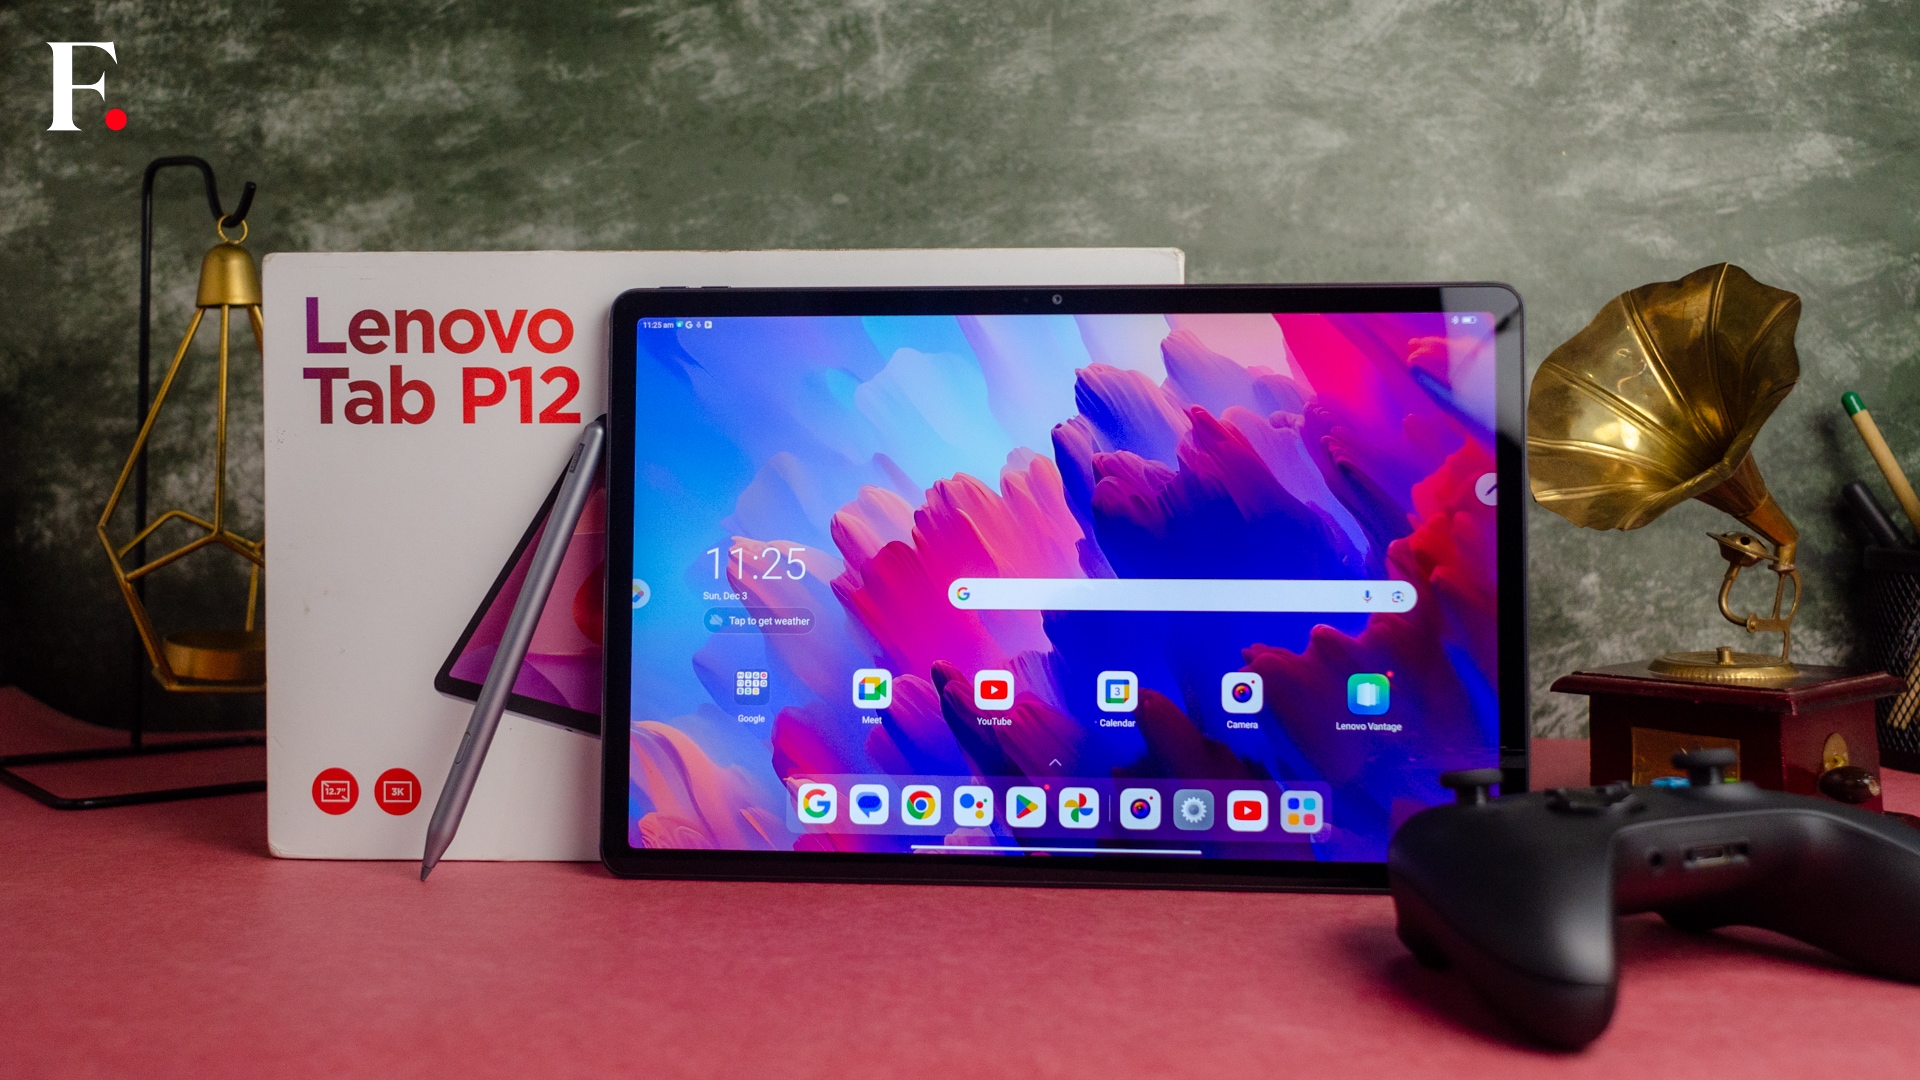 Lenovo Tab P12: A Detailed Overview of the Features, Price, and